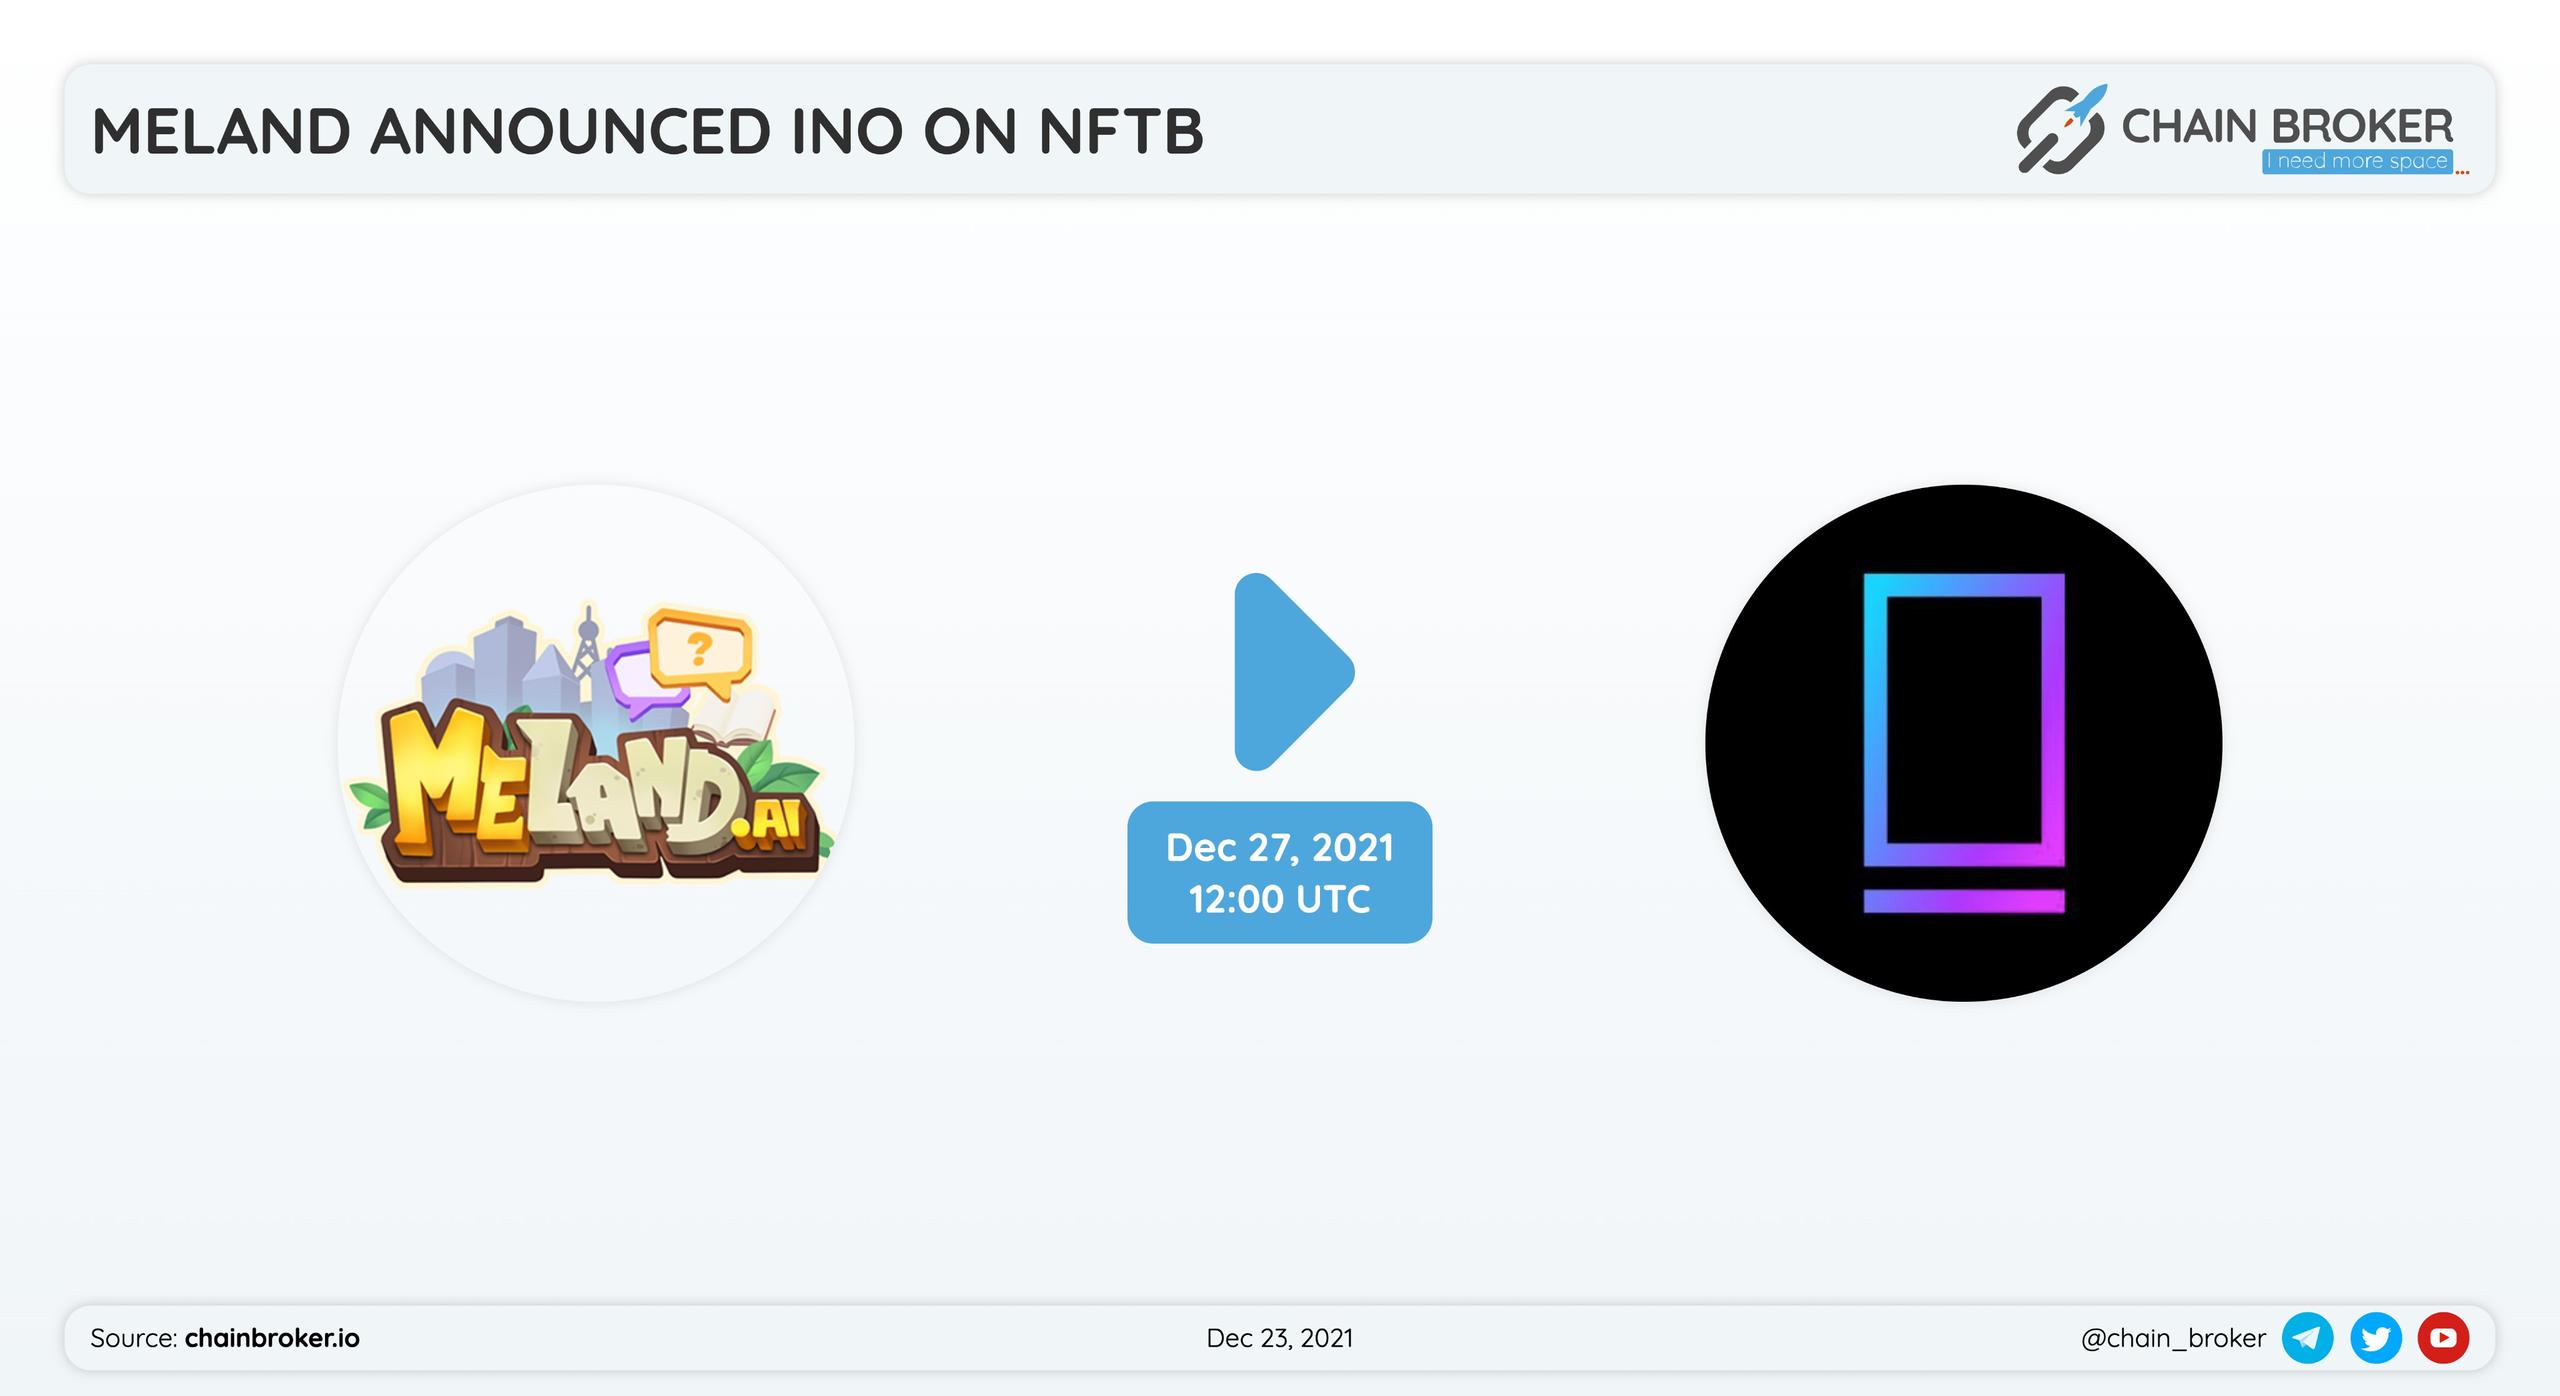 Meland has partnered with NFTb for an INO.